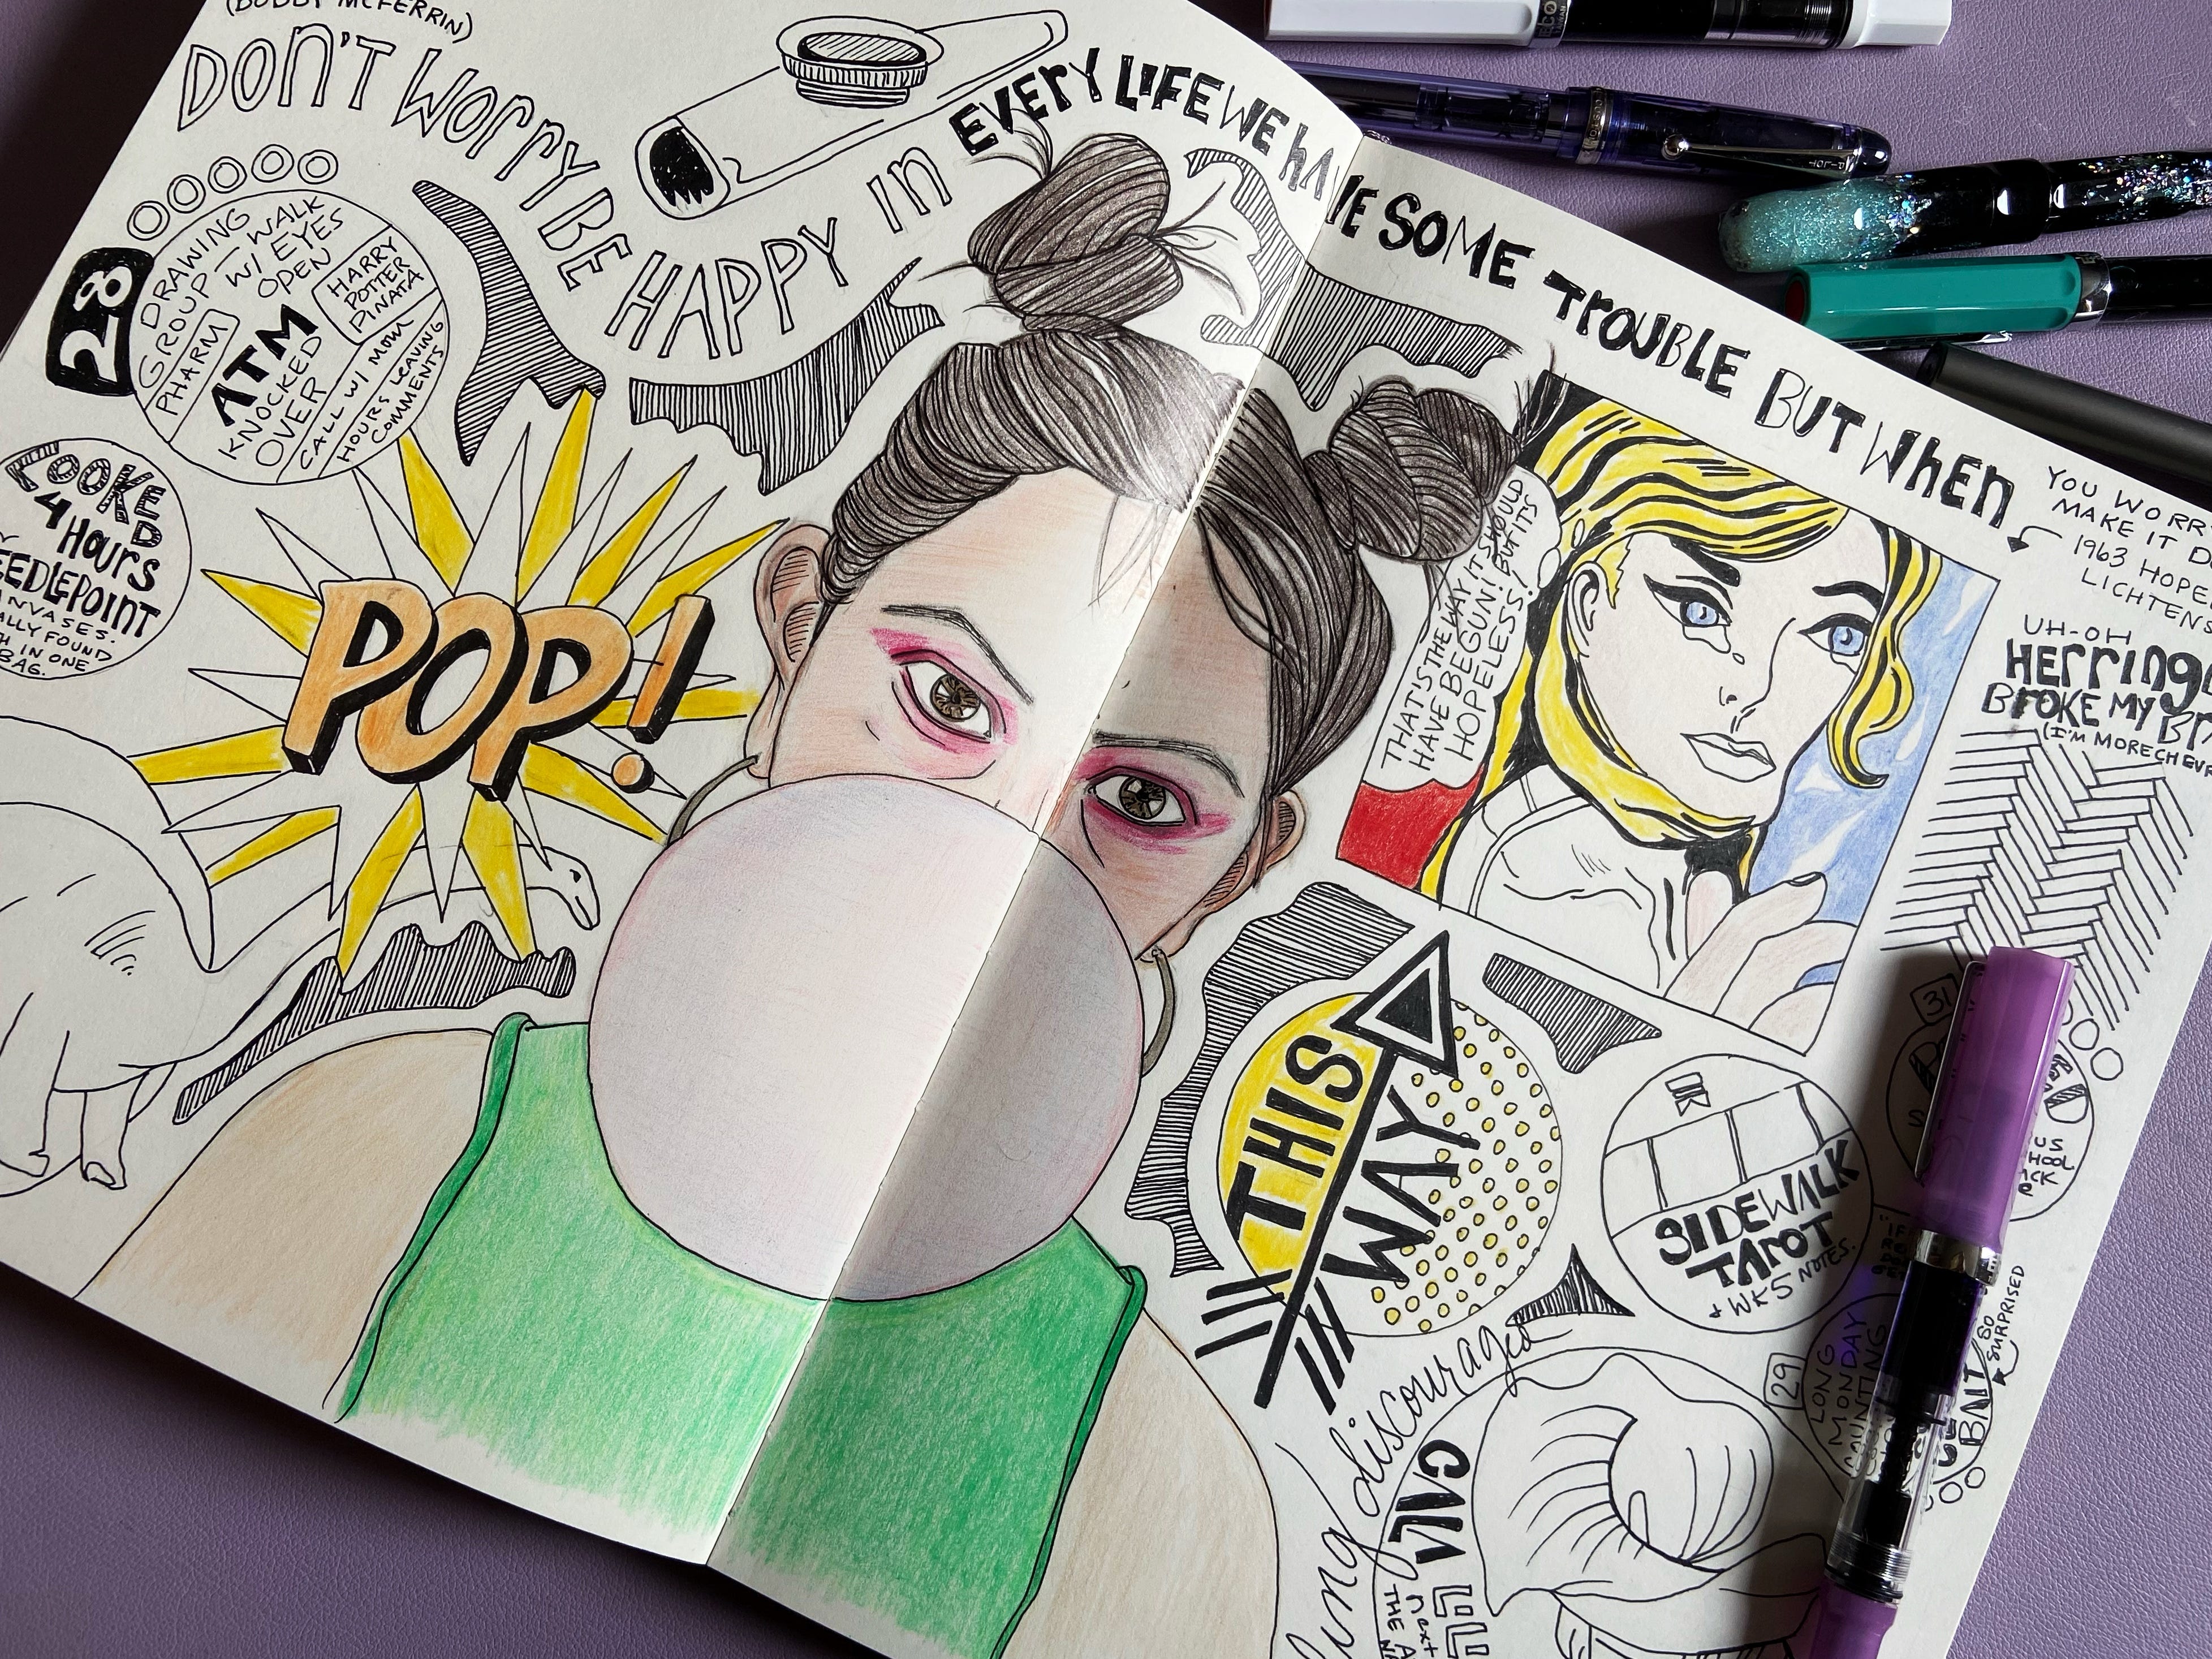 Week 5 illustrated journal spread with portrait of woman with bubble gum